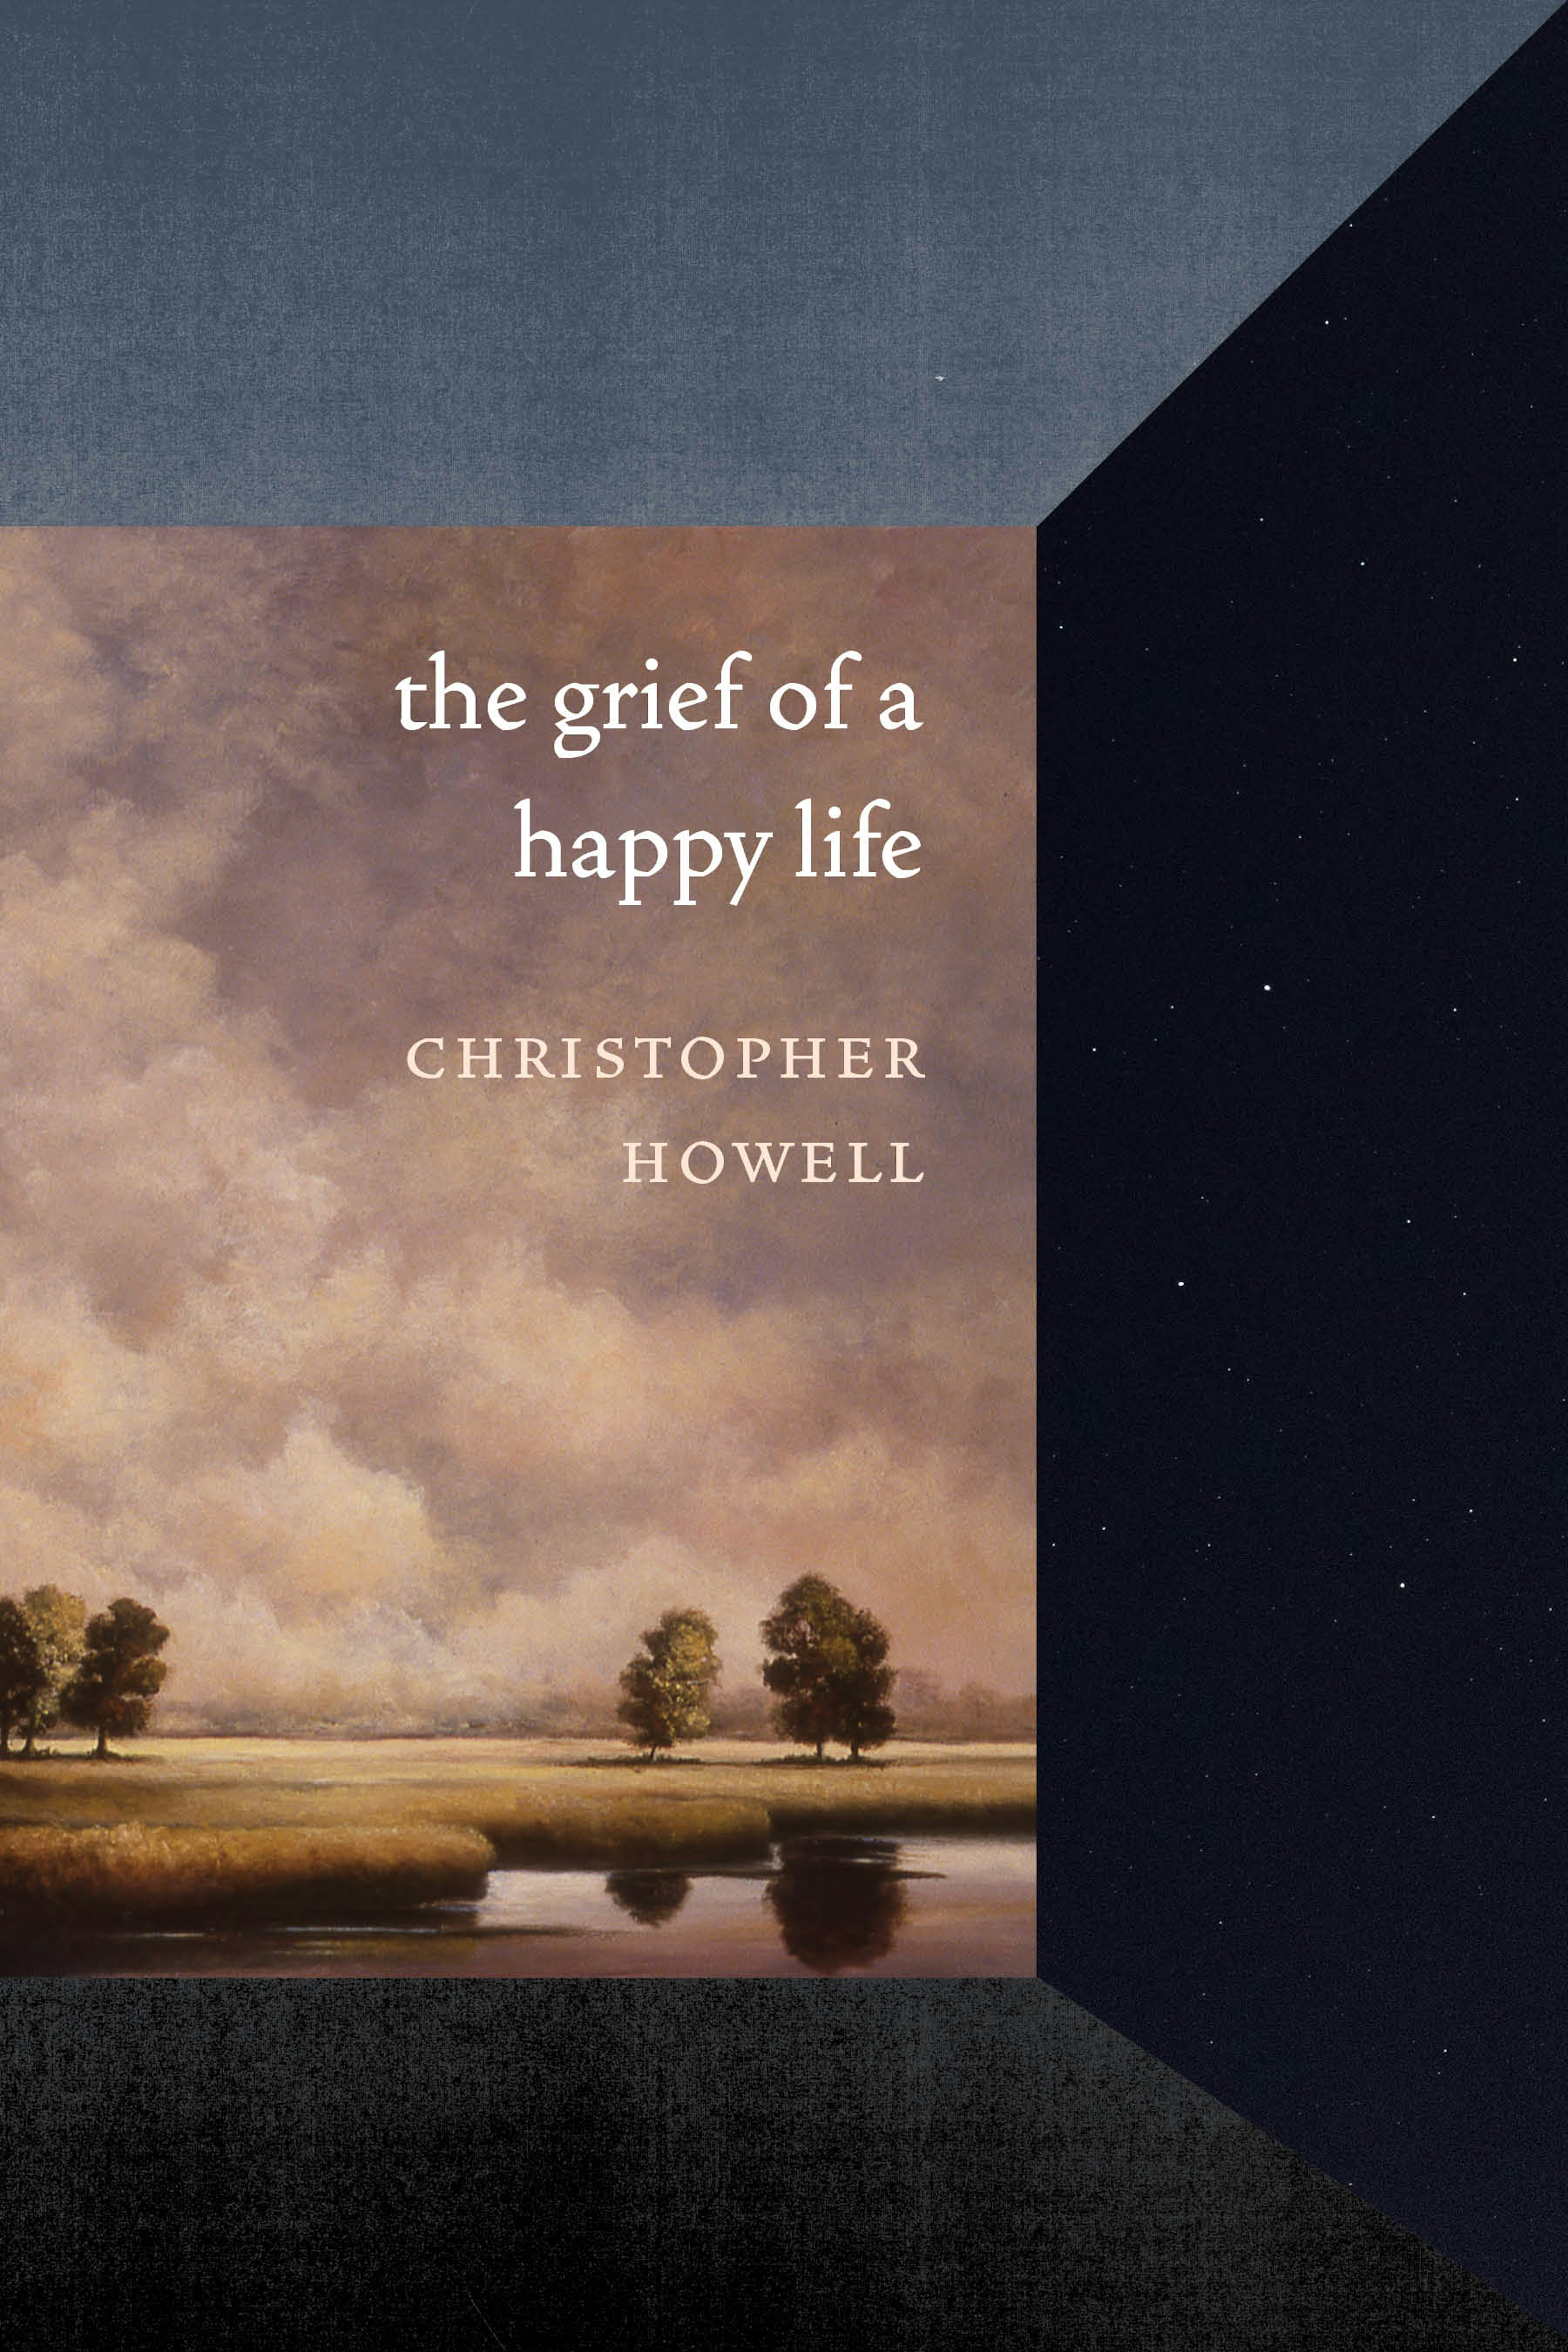 The Grief of a Happy Life